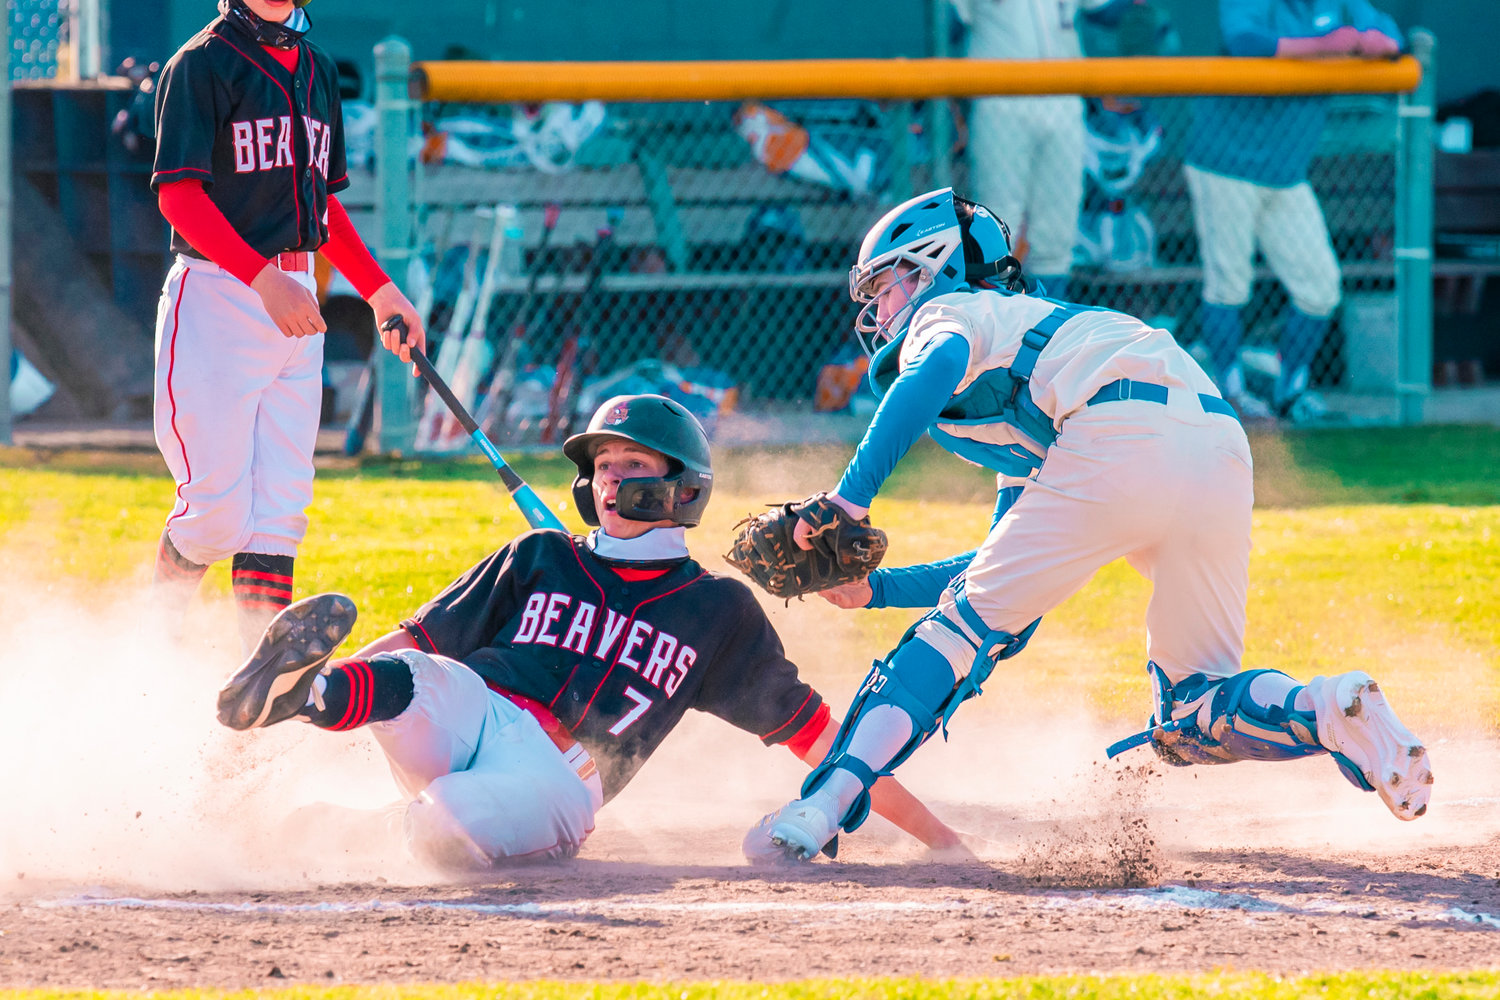 Rochester’s Cody Morton (4) makes an out at home plate during a game against Tenino Monday afternoon at Rochester High School.